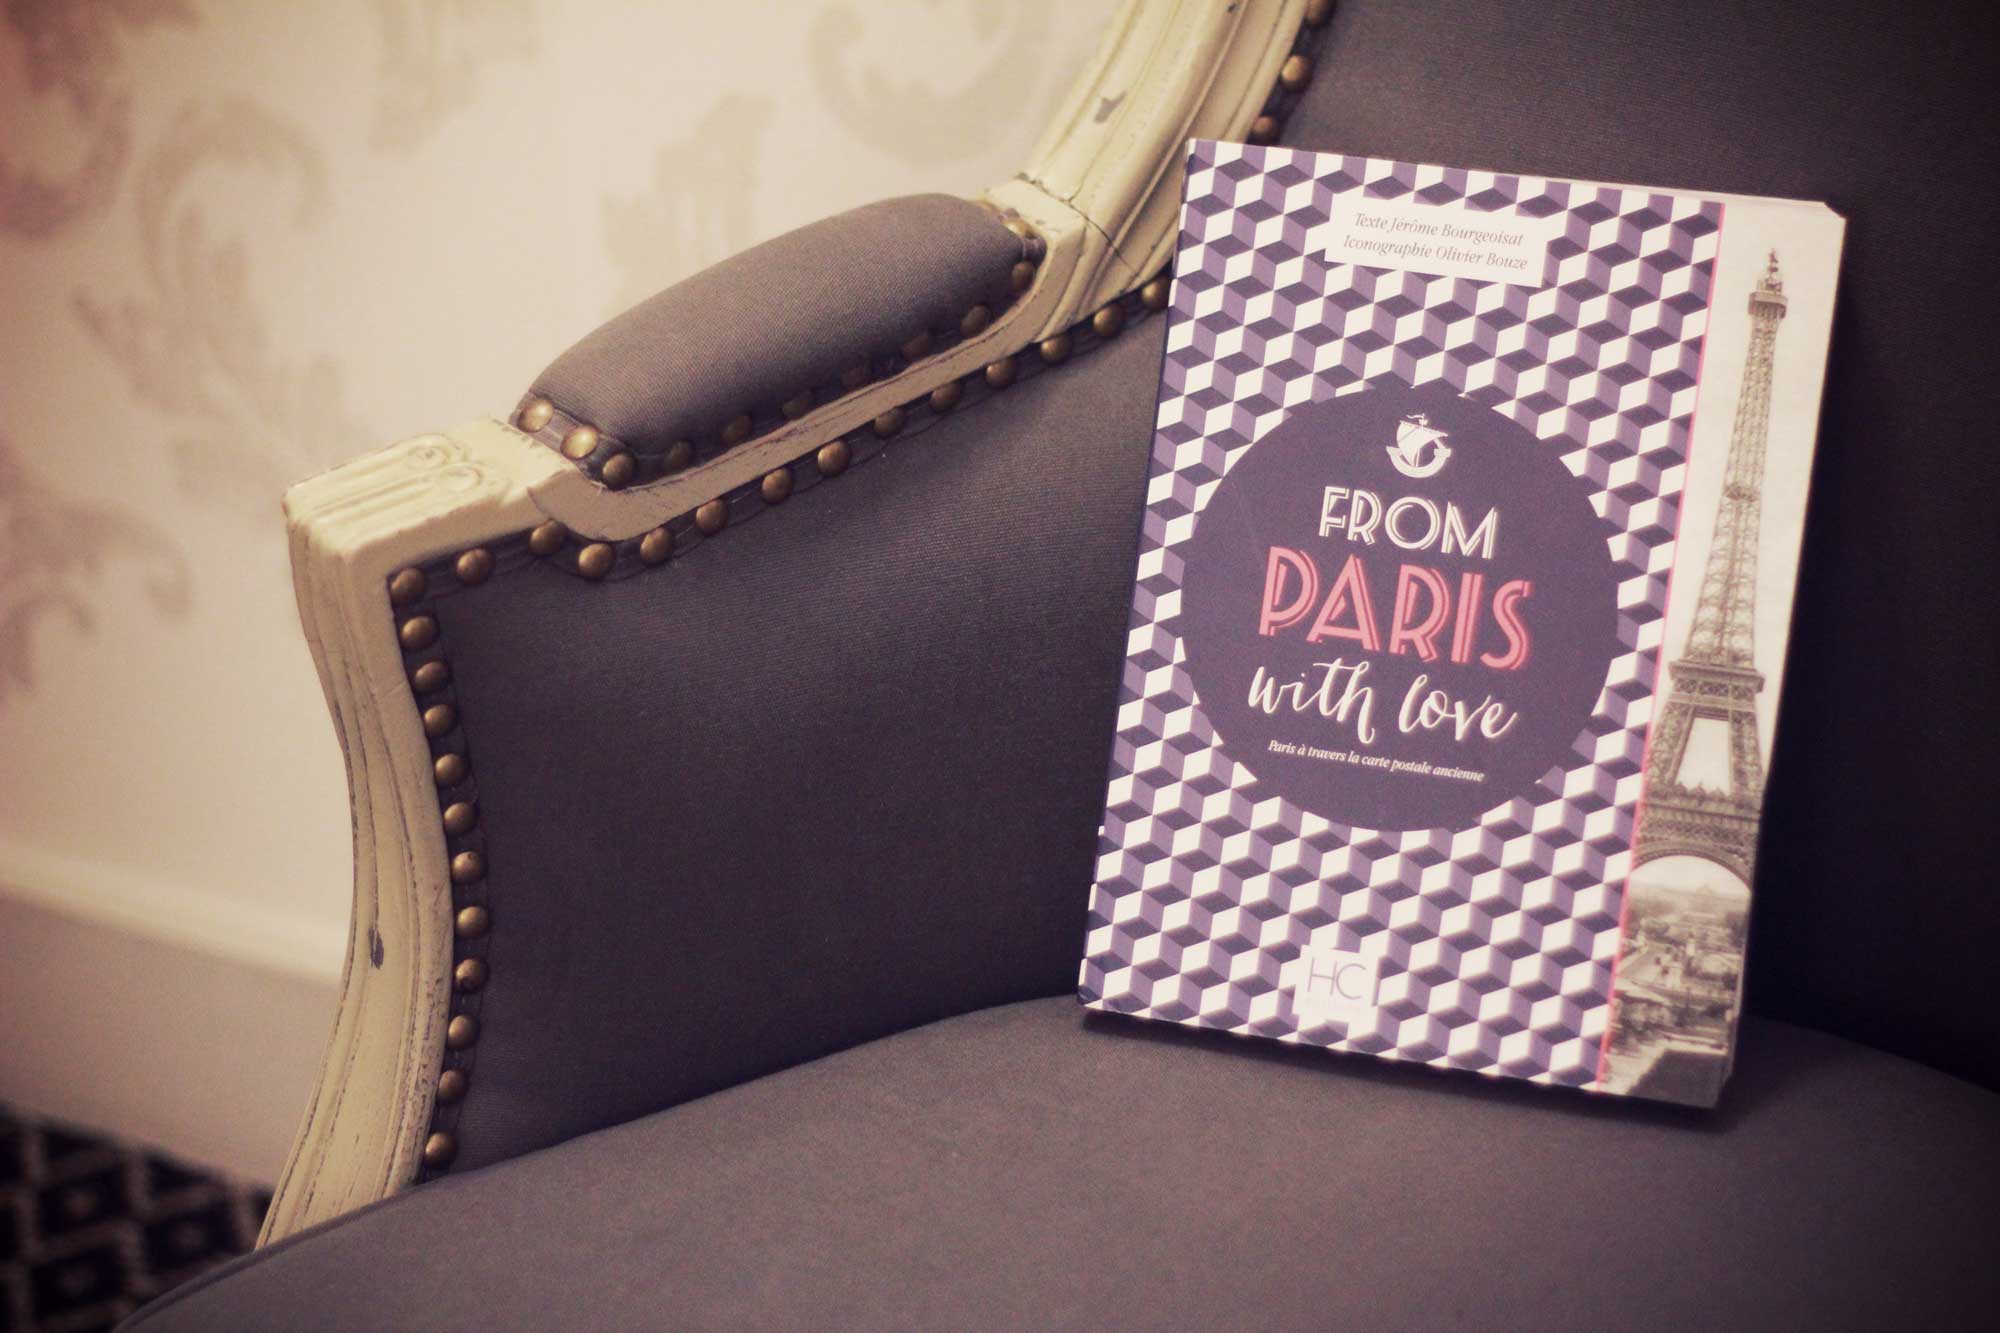 Beau livre - From Paris with love